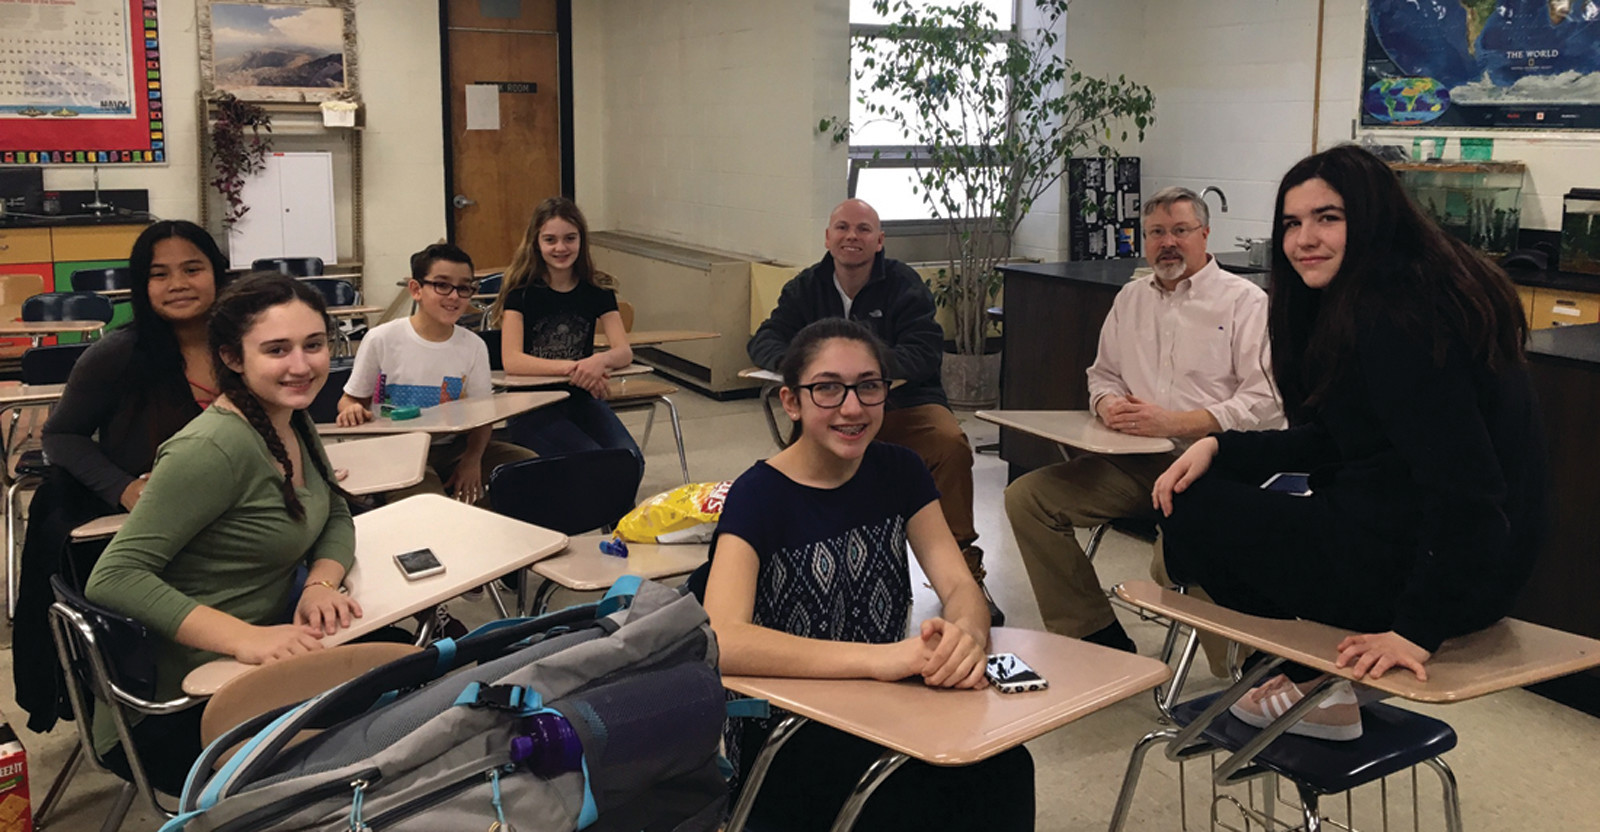 A HARD-WORKING GROUP: The Greenhouse Effect team consists of students Elizabeth Cowart, Julia Deal, Eric Garcia, Ava Kavanagh, Leah Phann and Jordan Simpson, and they work under the supervision of STEM Club faculty advisors Michael Blackburn and John Worthington.